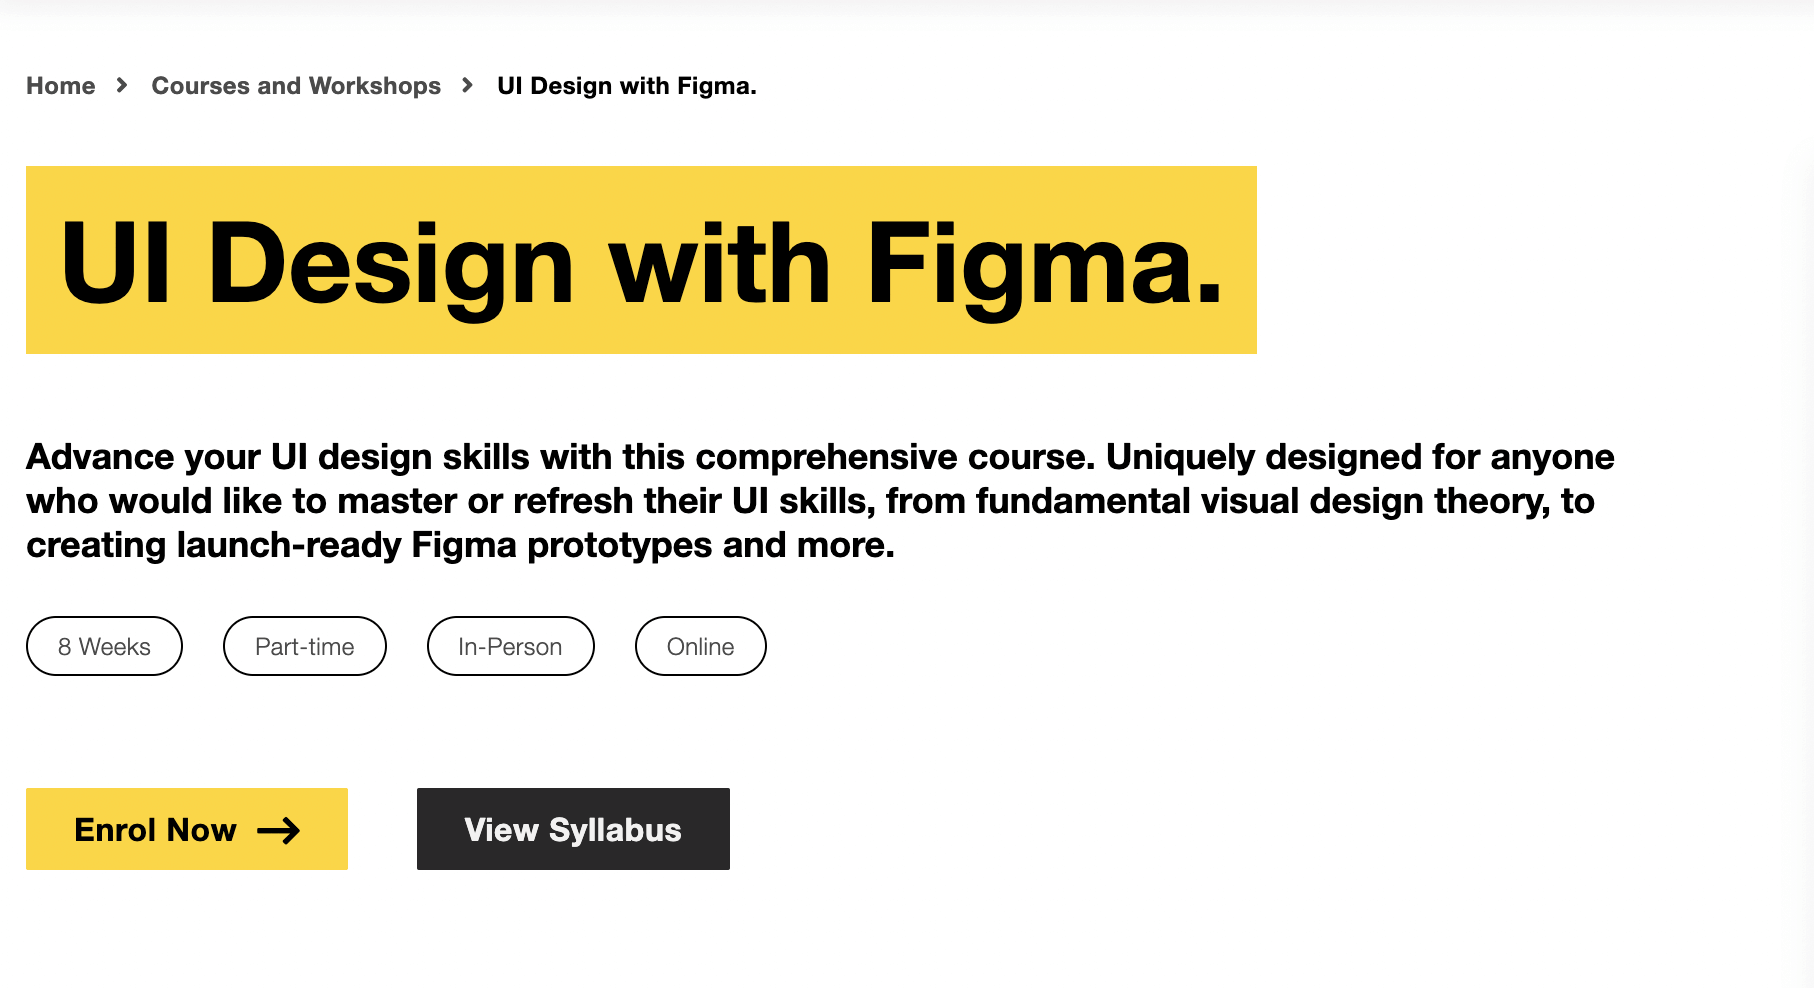 Experience Haus UI Design With Figma Course